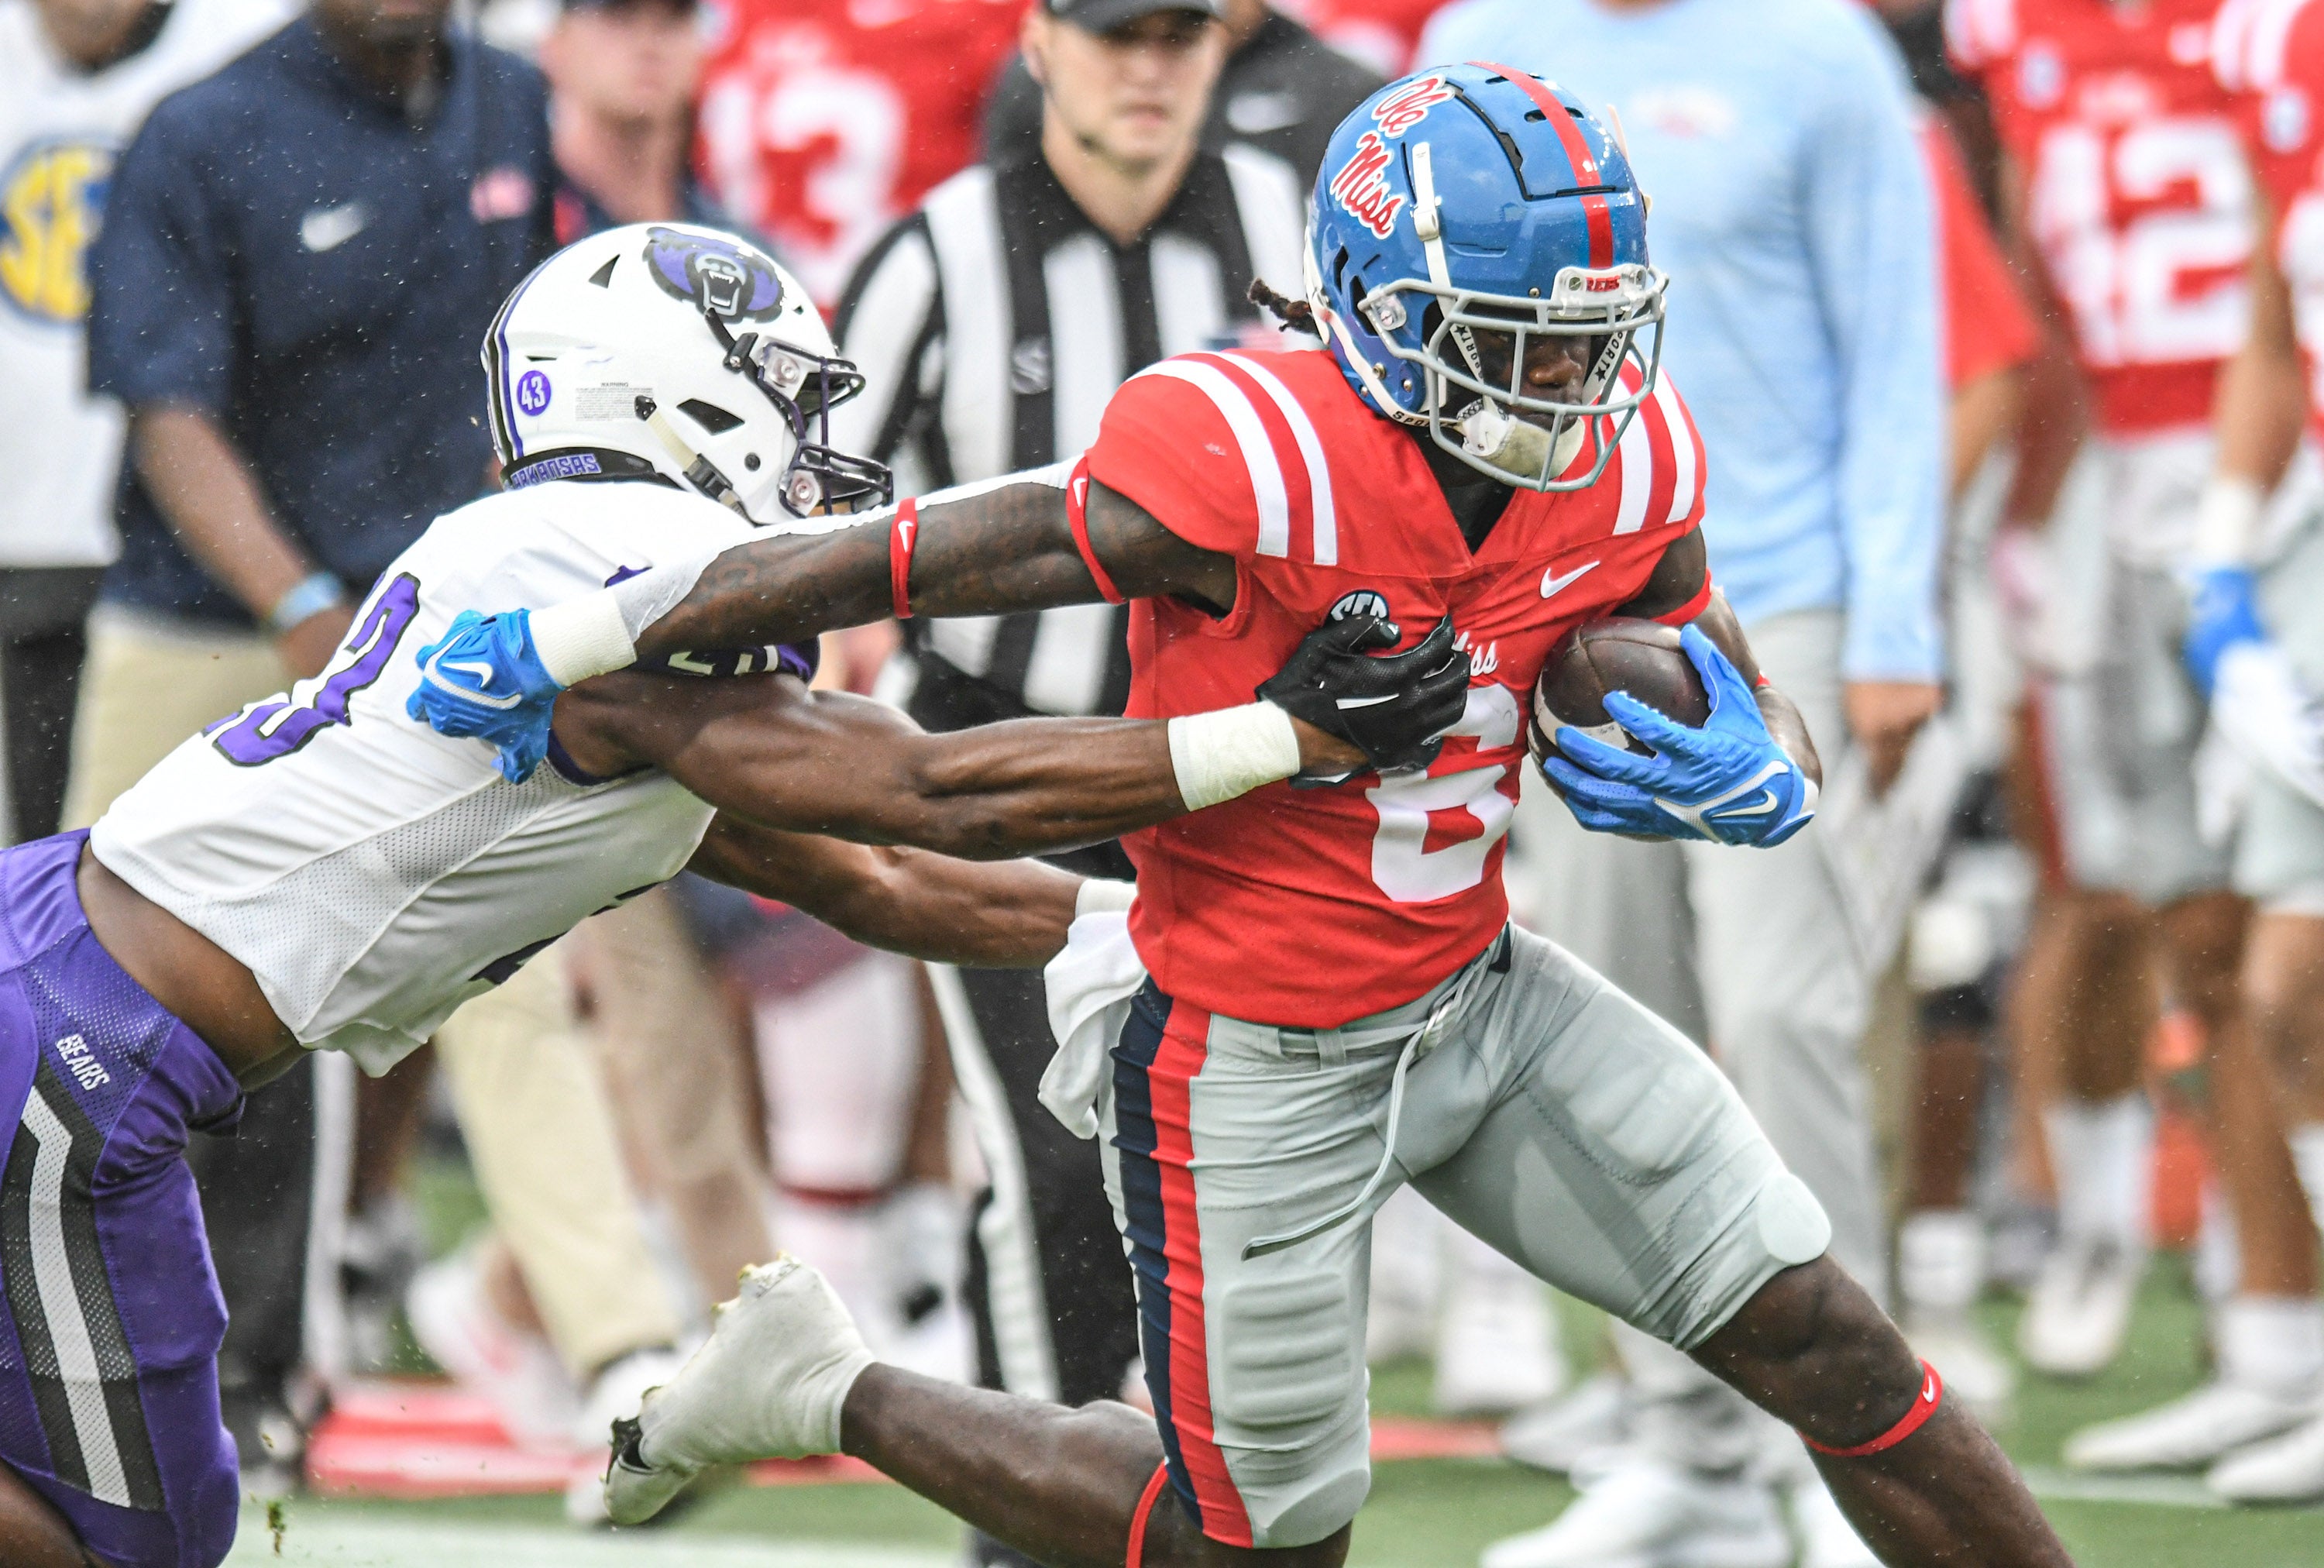 Ole Miss running back Zach Evans declares for NFL draft The Oxford